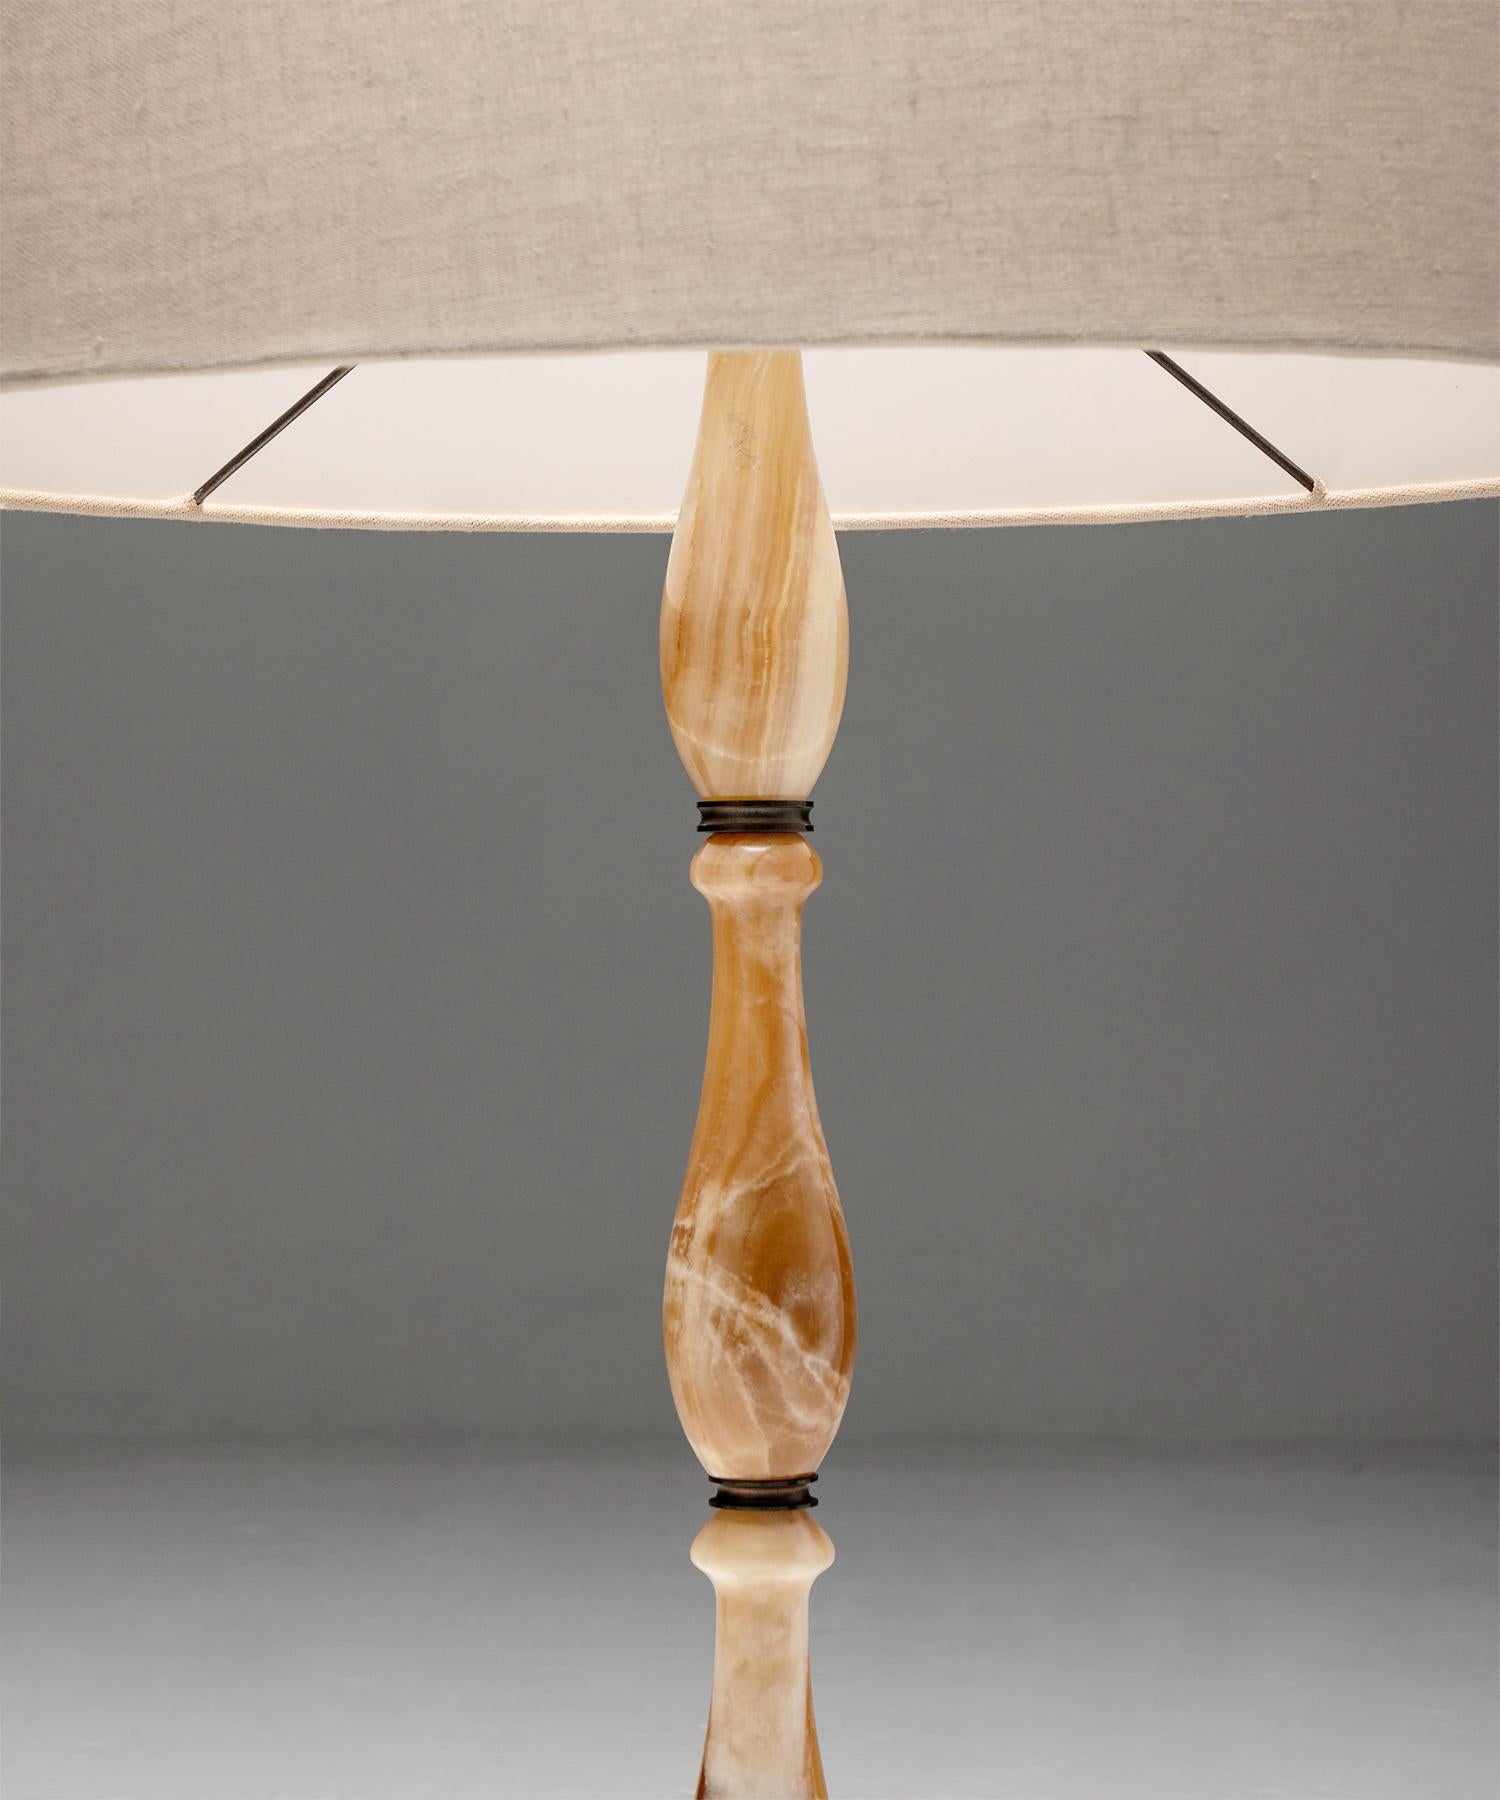 Onyx table lamp

Sweden Circa 1950

Carved and polished onyx with brass details and new linen shade.

Measures: 15